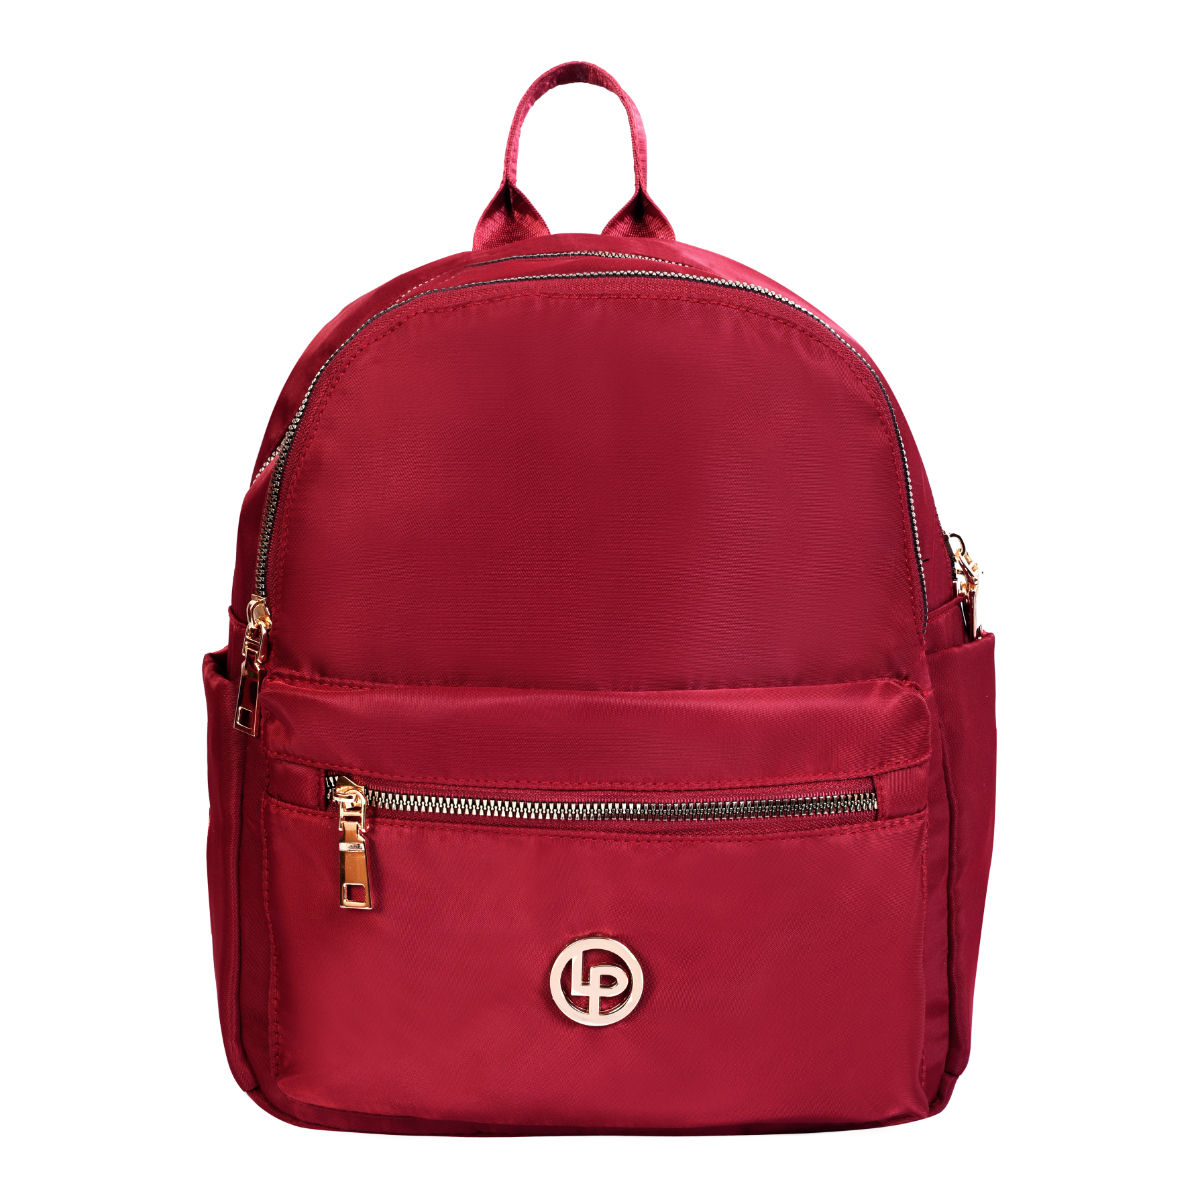 Women Leather Backpack for Travel - Red | Women leather backpack, Womens  backpack, Women handbags